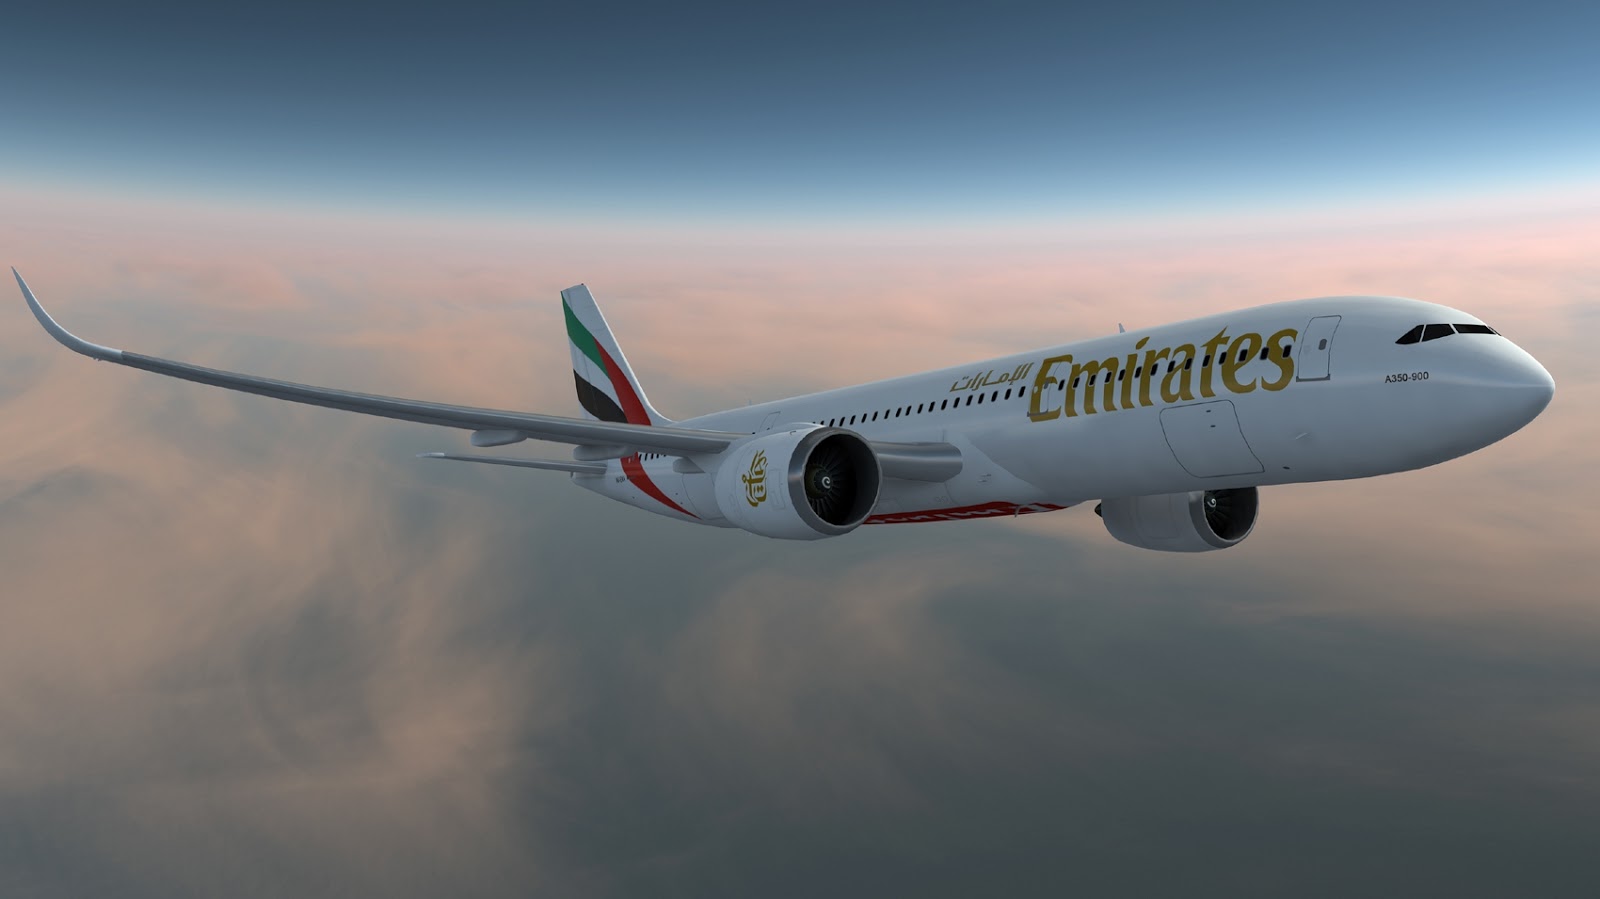 Airbus A350-900 Rendering Image Of Emirates Airlines - Airbus A350 900 Emirates , HD Wallpaper & Backgrounds